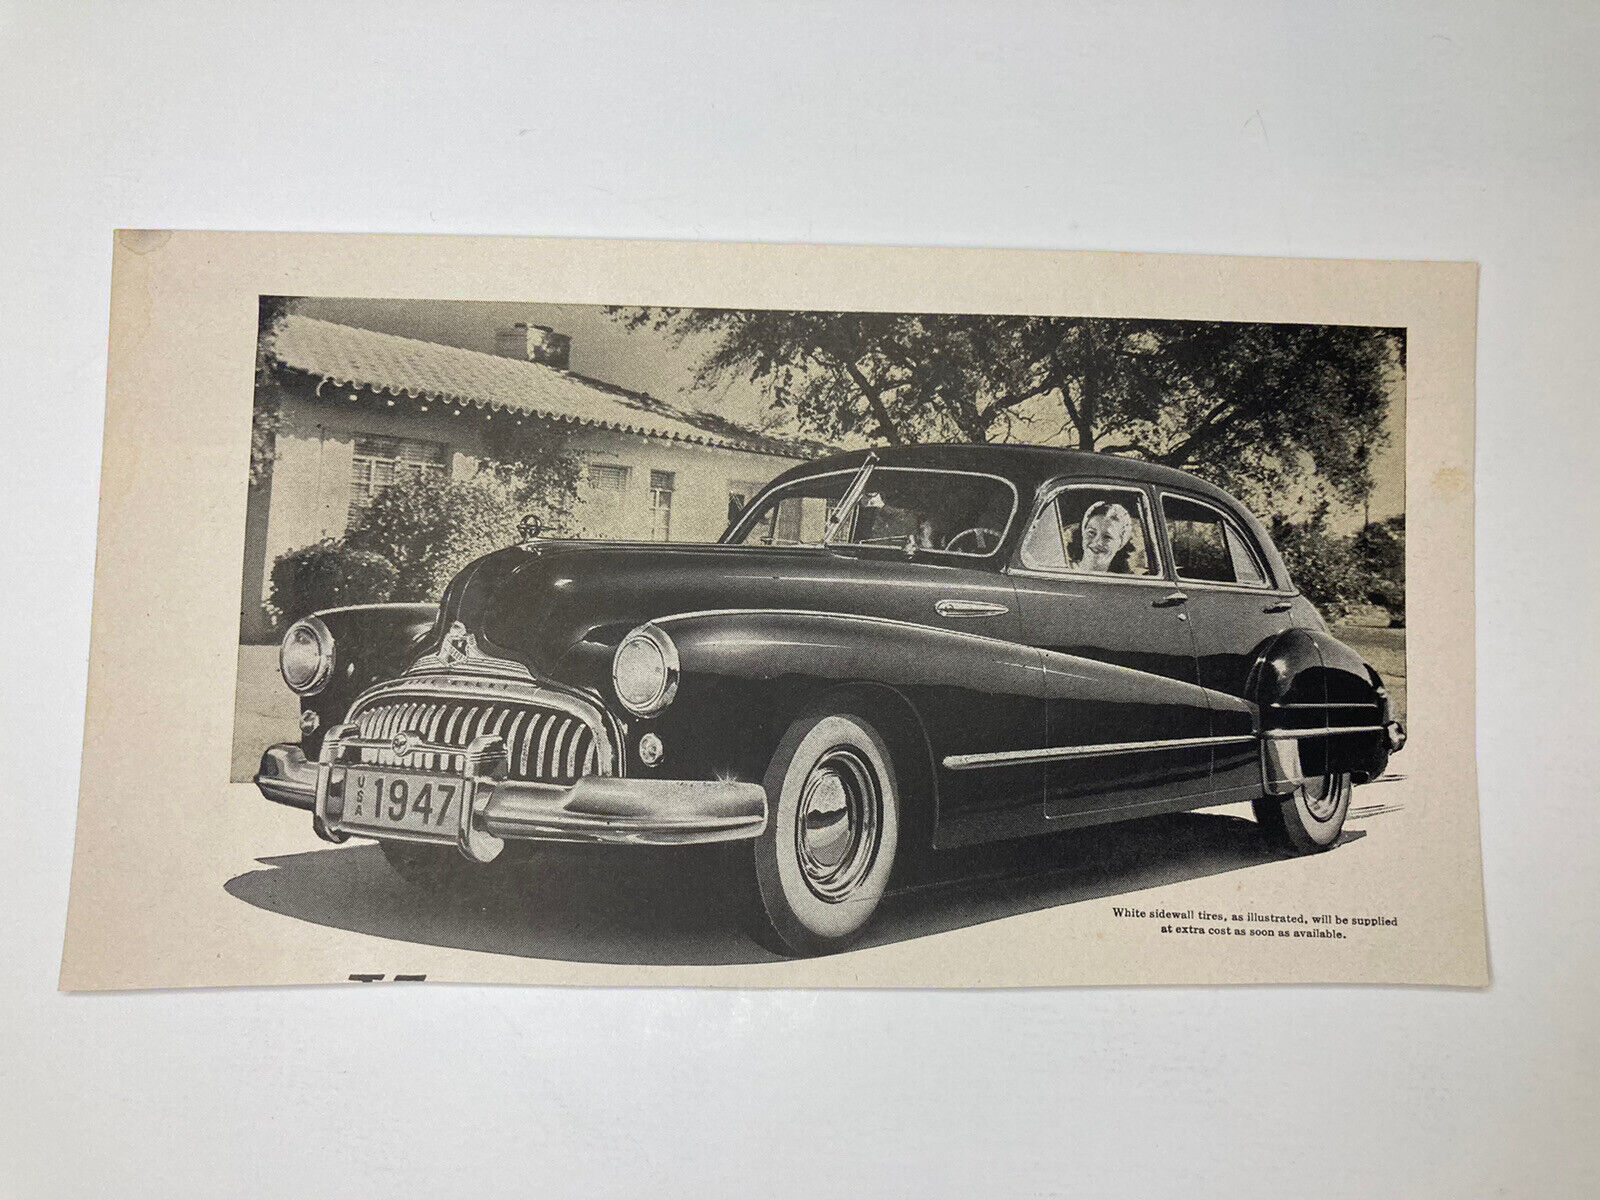 1947 Buick Print Ad Classic Car w/ White Sidewall Tires Vintage